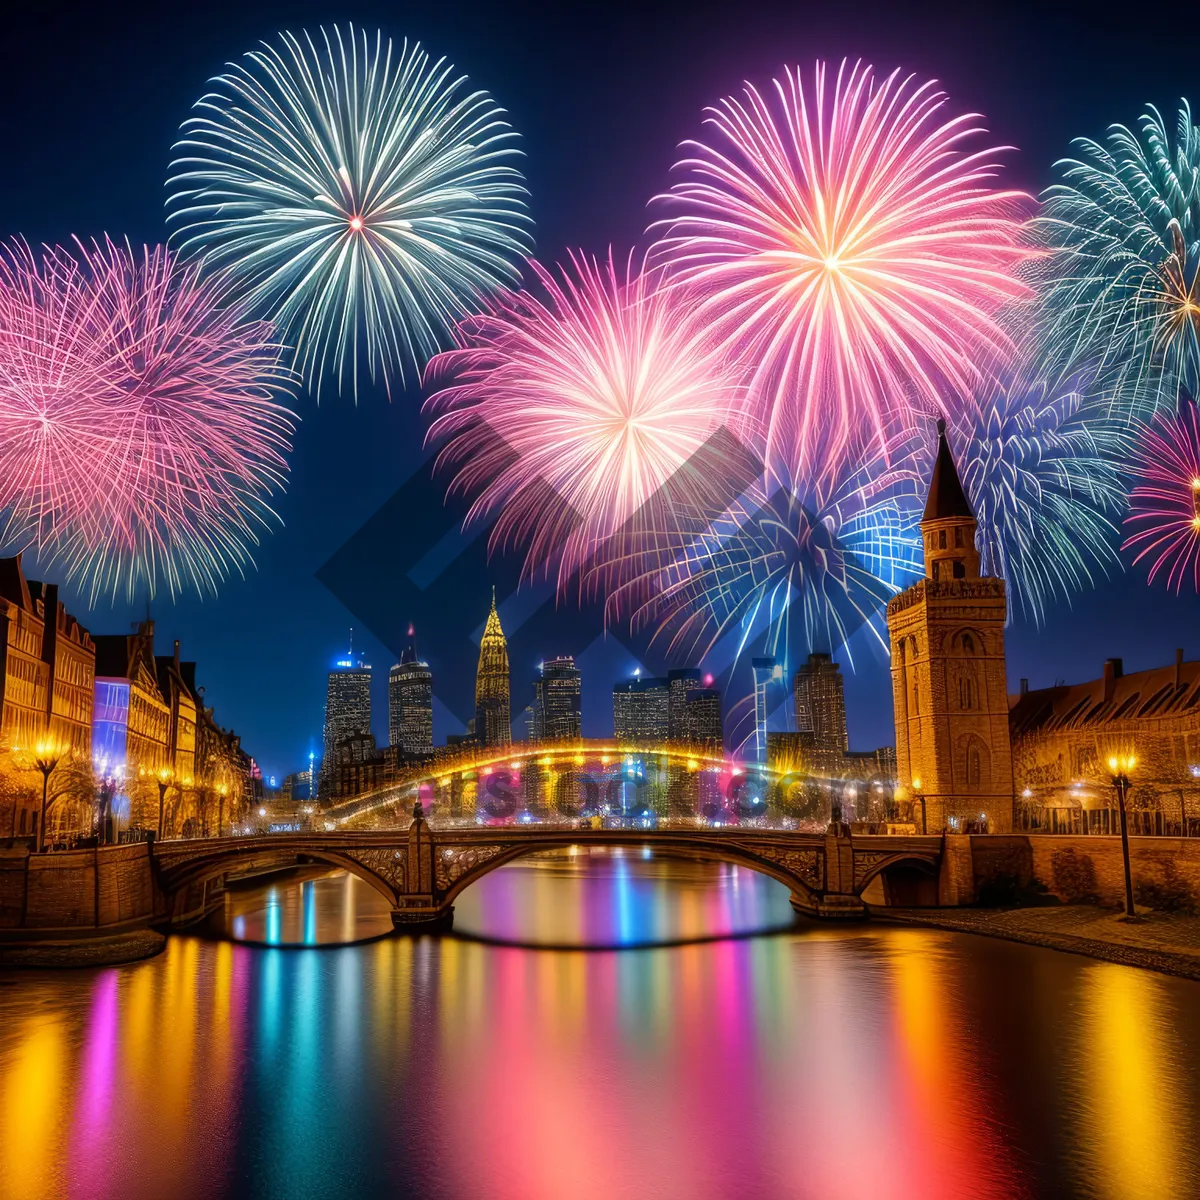 Picture of Colorful Fireworks Lighting Up the Night Sky